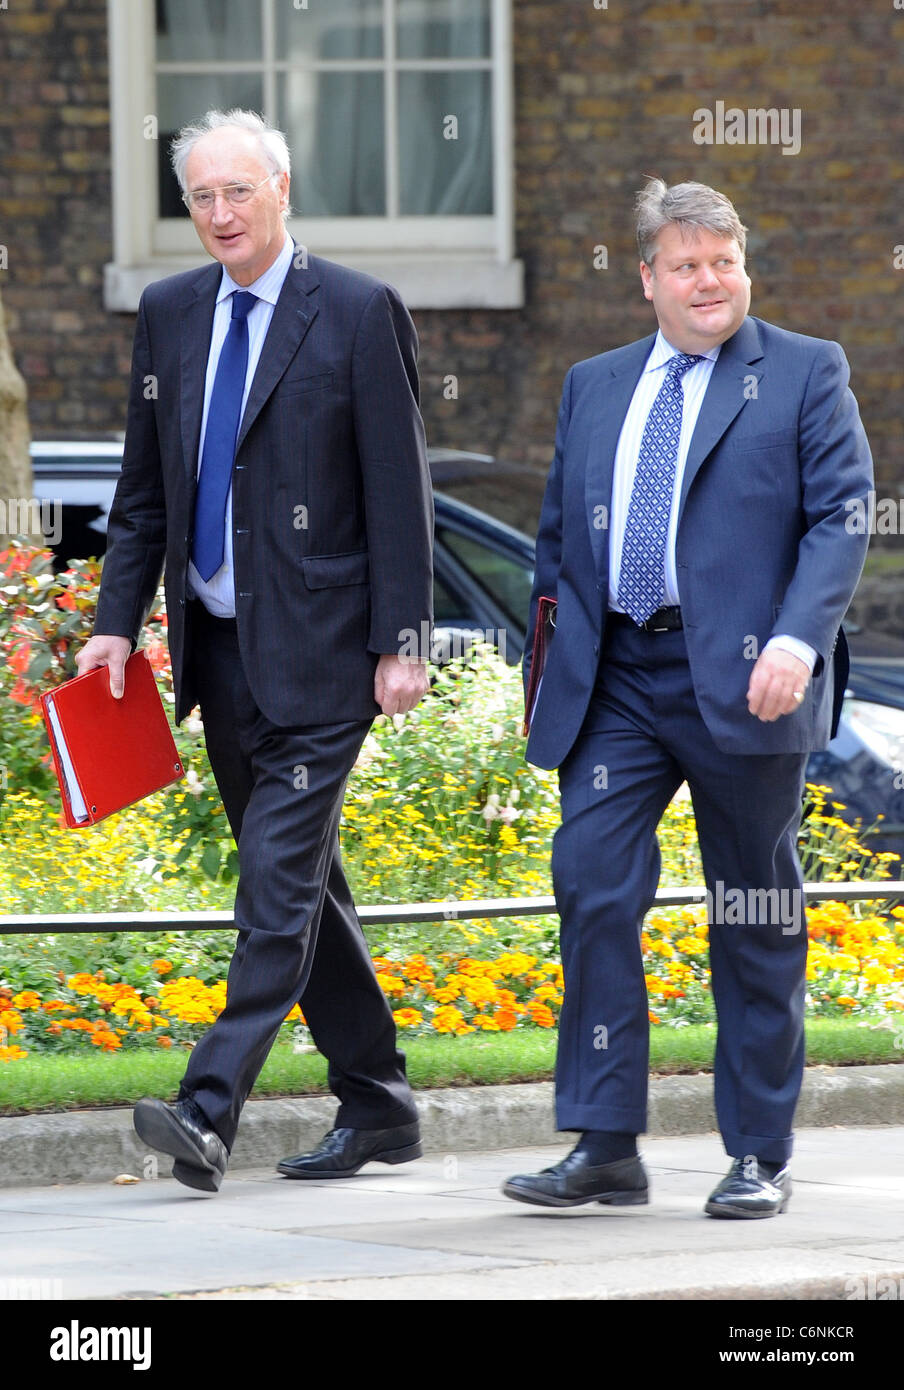 Lord Strathclyde (R) and Sir George Young (L) Ministers arrive at Downing  Street for a Cabinet meeting. London, England Stock Photo - Alamy